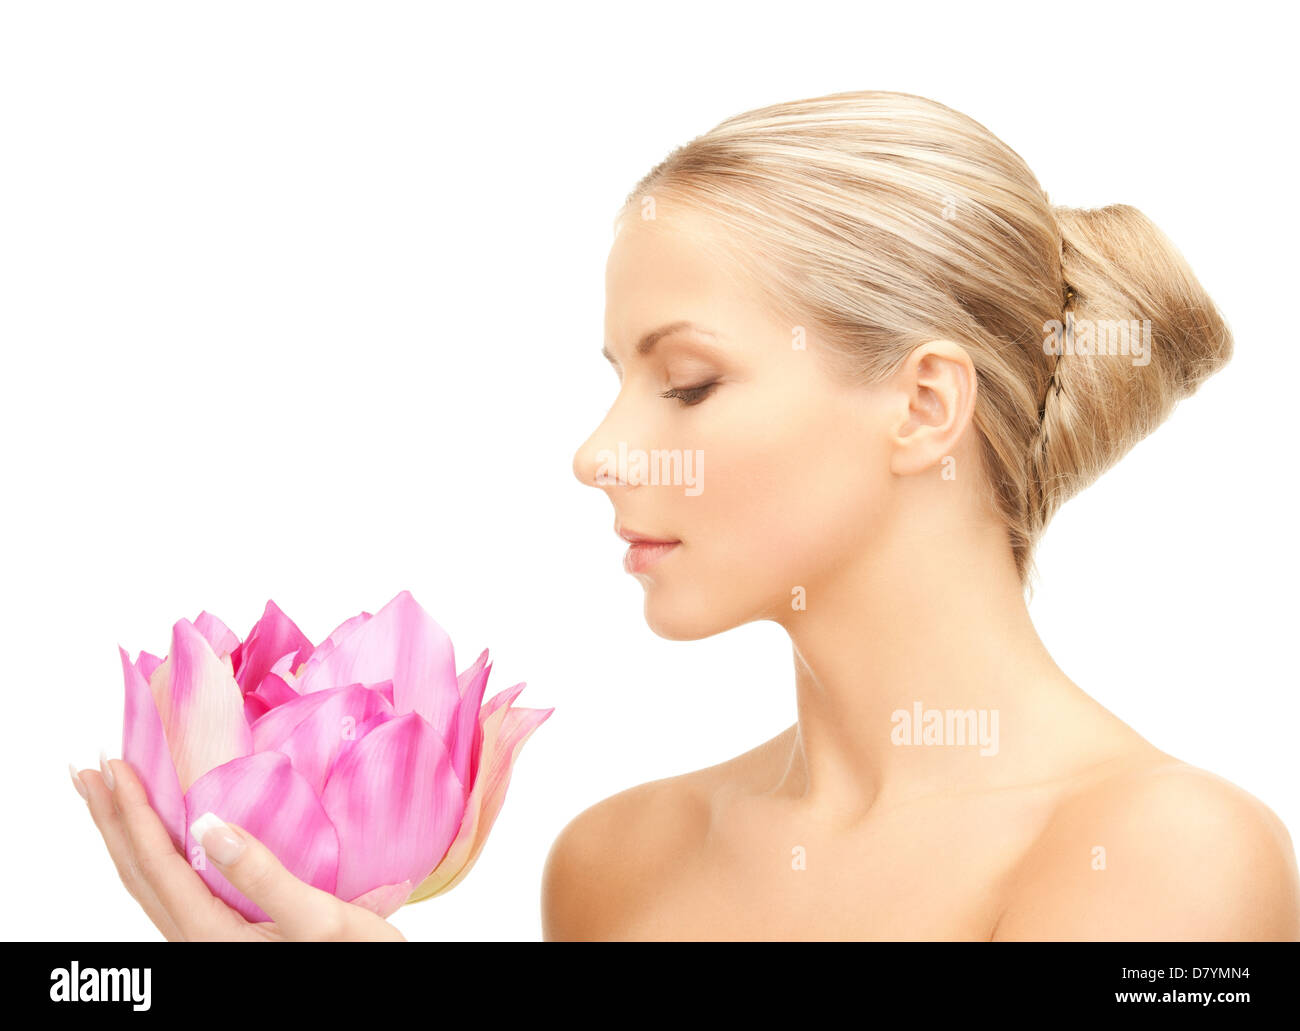 lovely woman with lotos flower Stock Photo